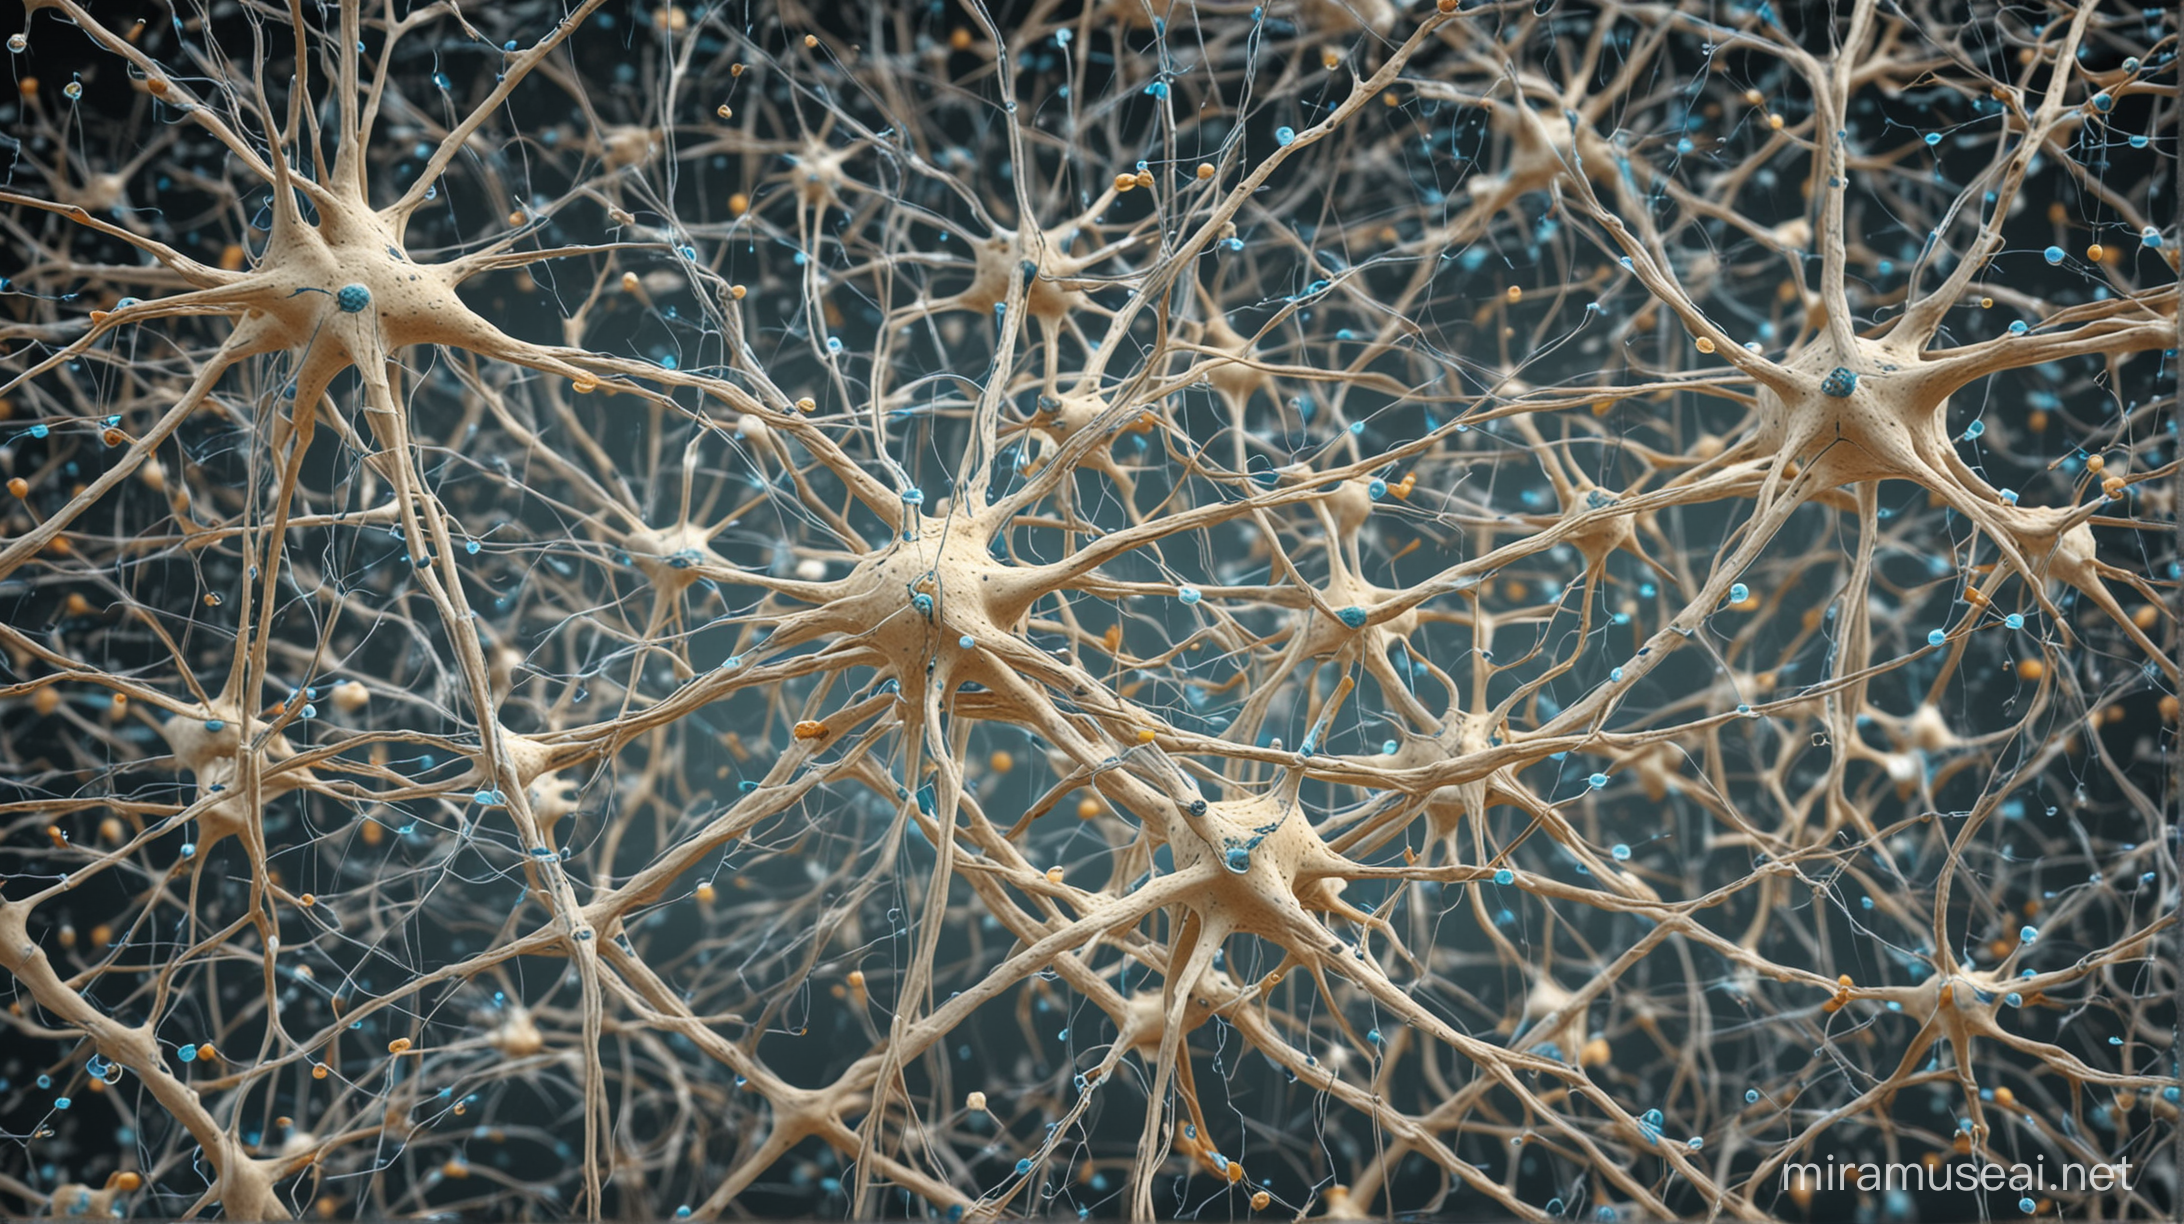 Many neurons with thousands axones and dendrits connected through synapses. There are not many molecules of dophamine between neurons